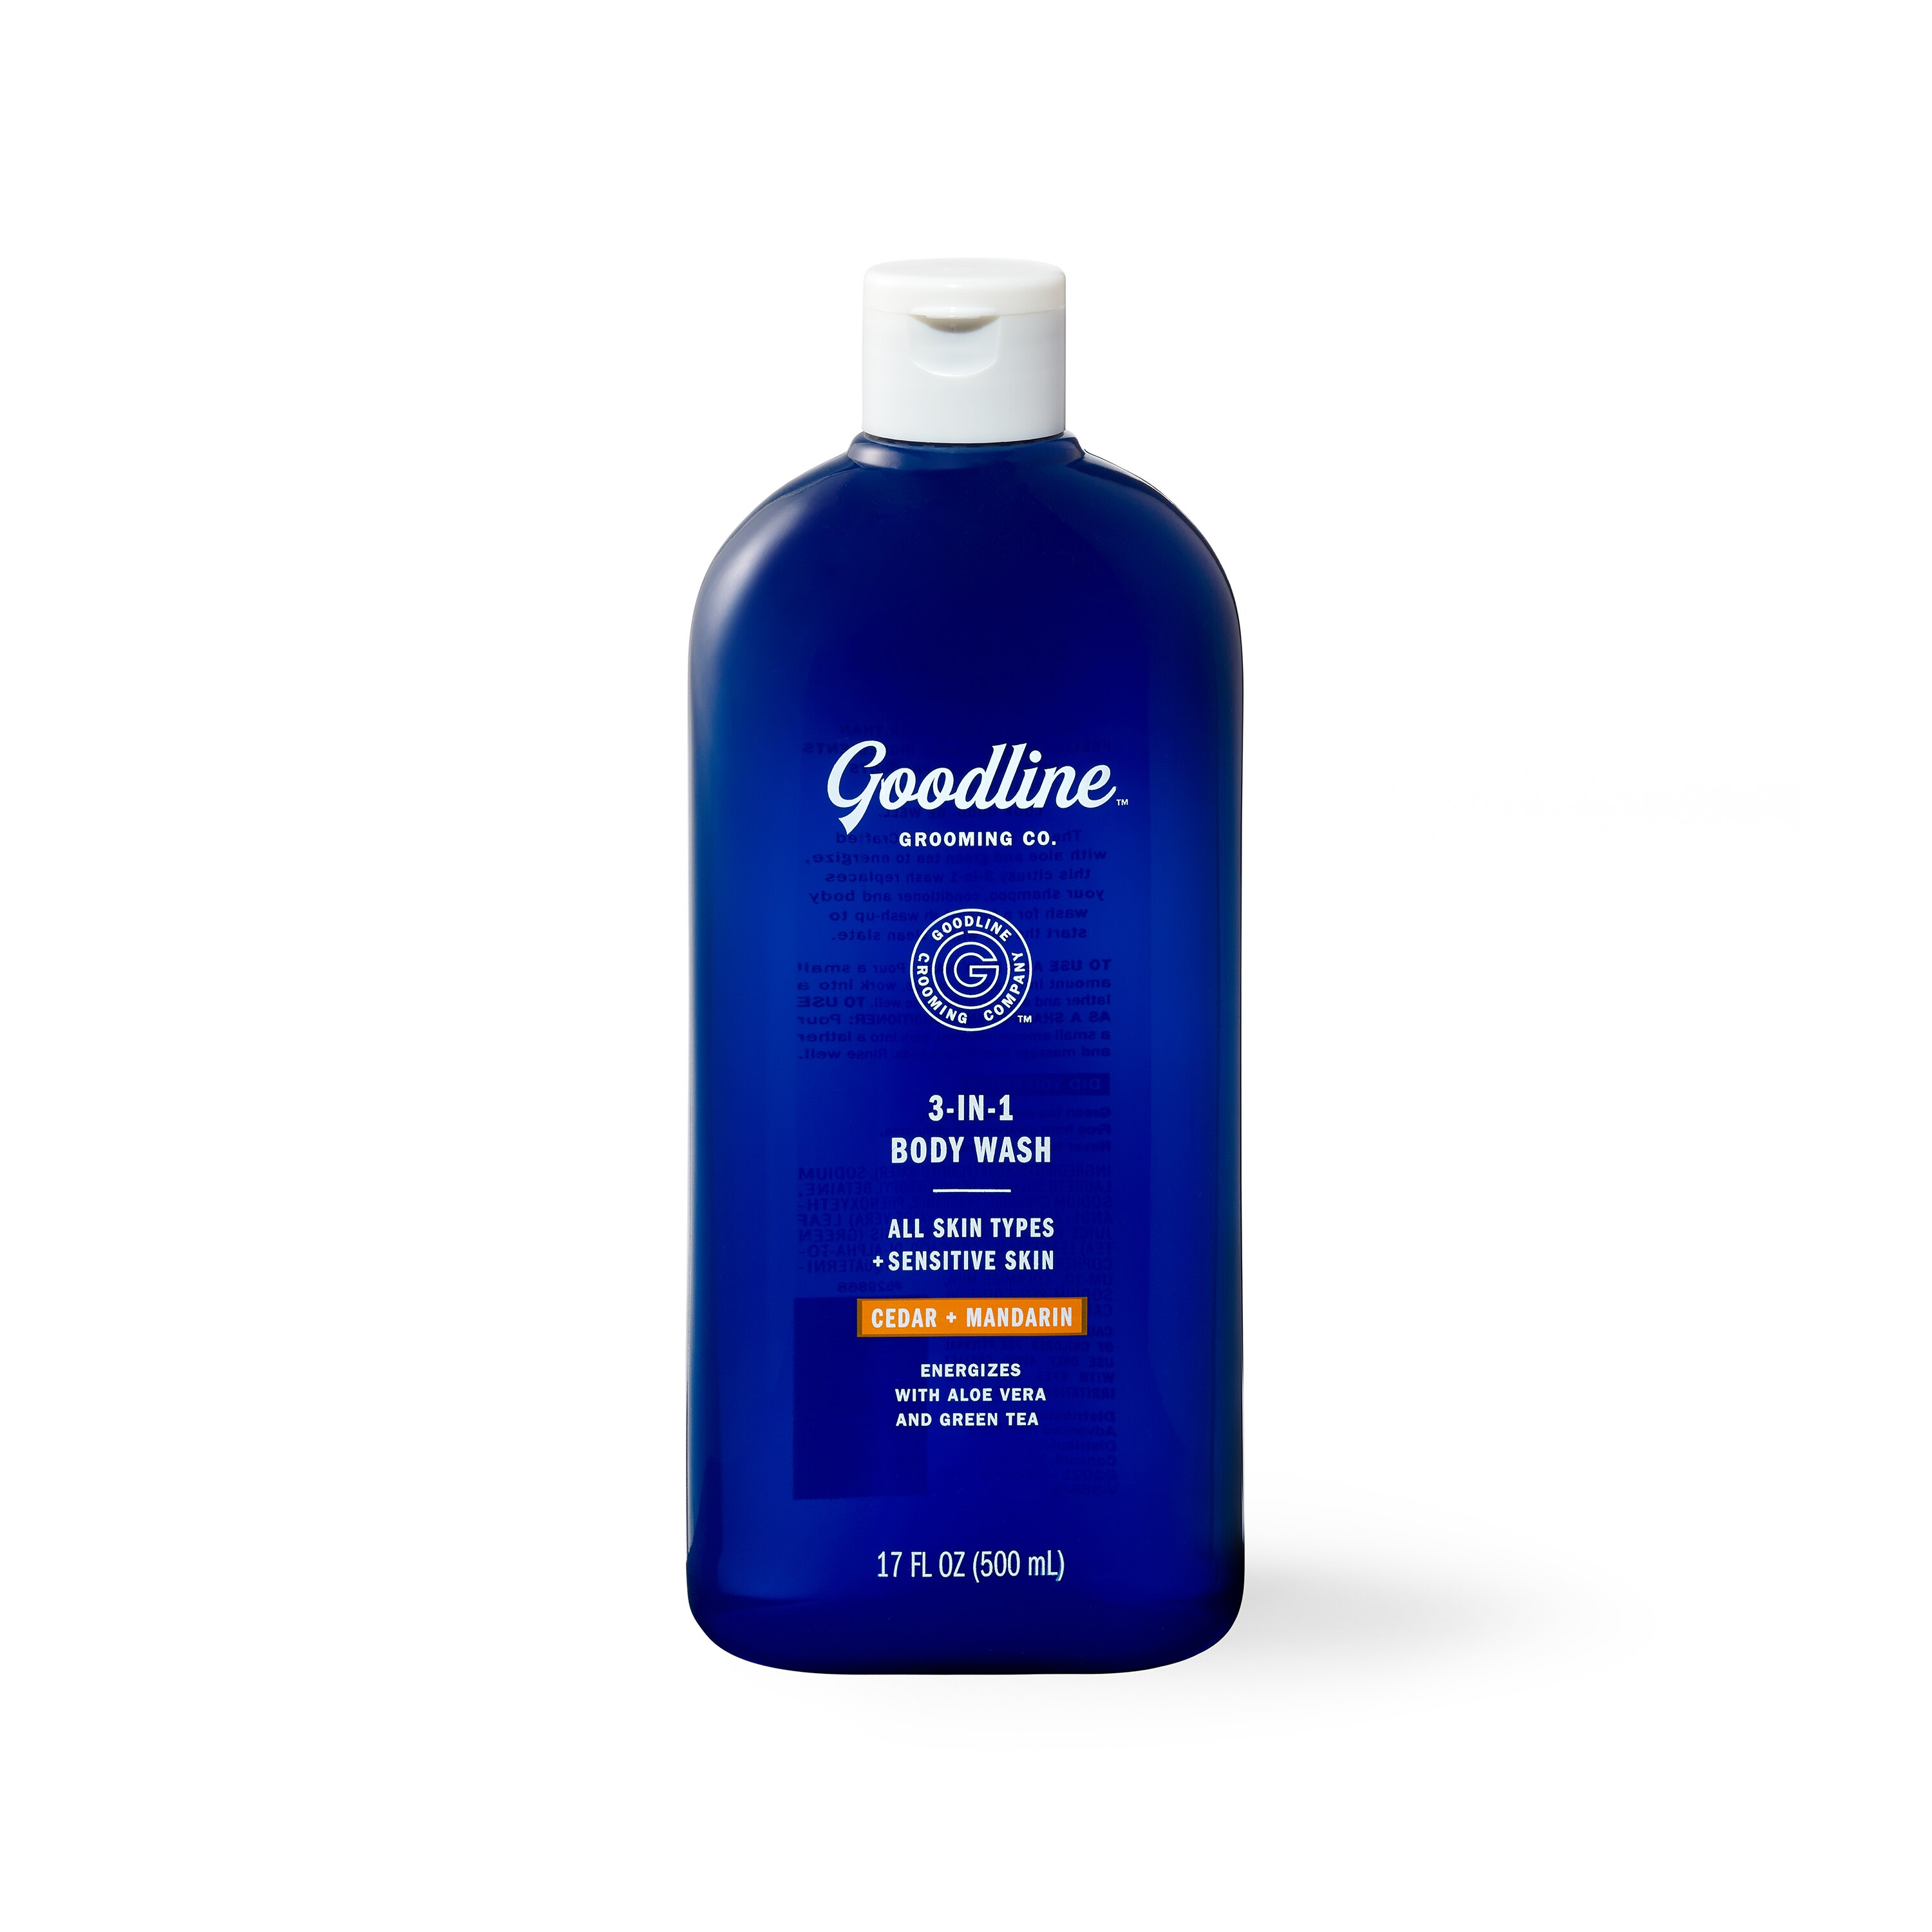 Goodline Grooming Co. 3-in-1 Body Wash, 17 OZ